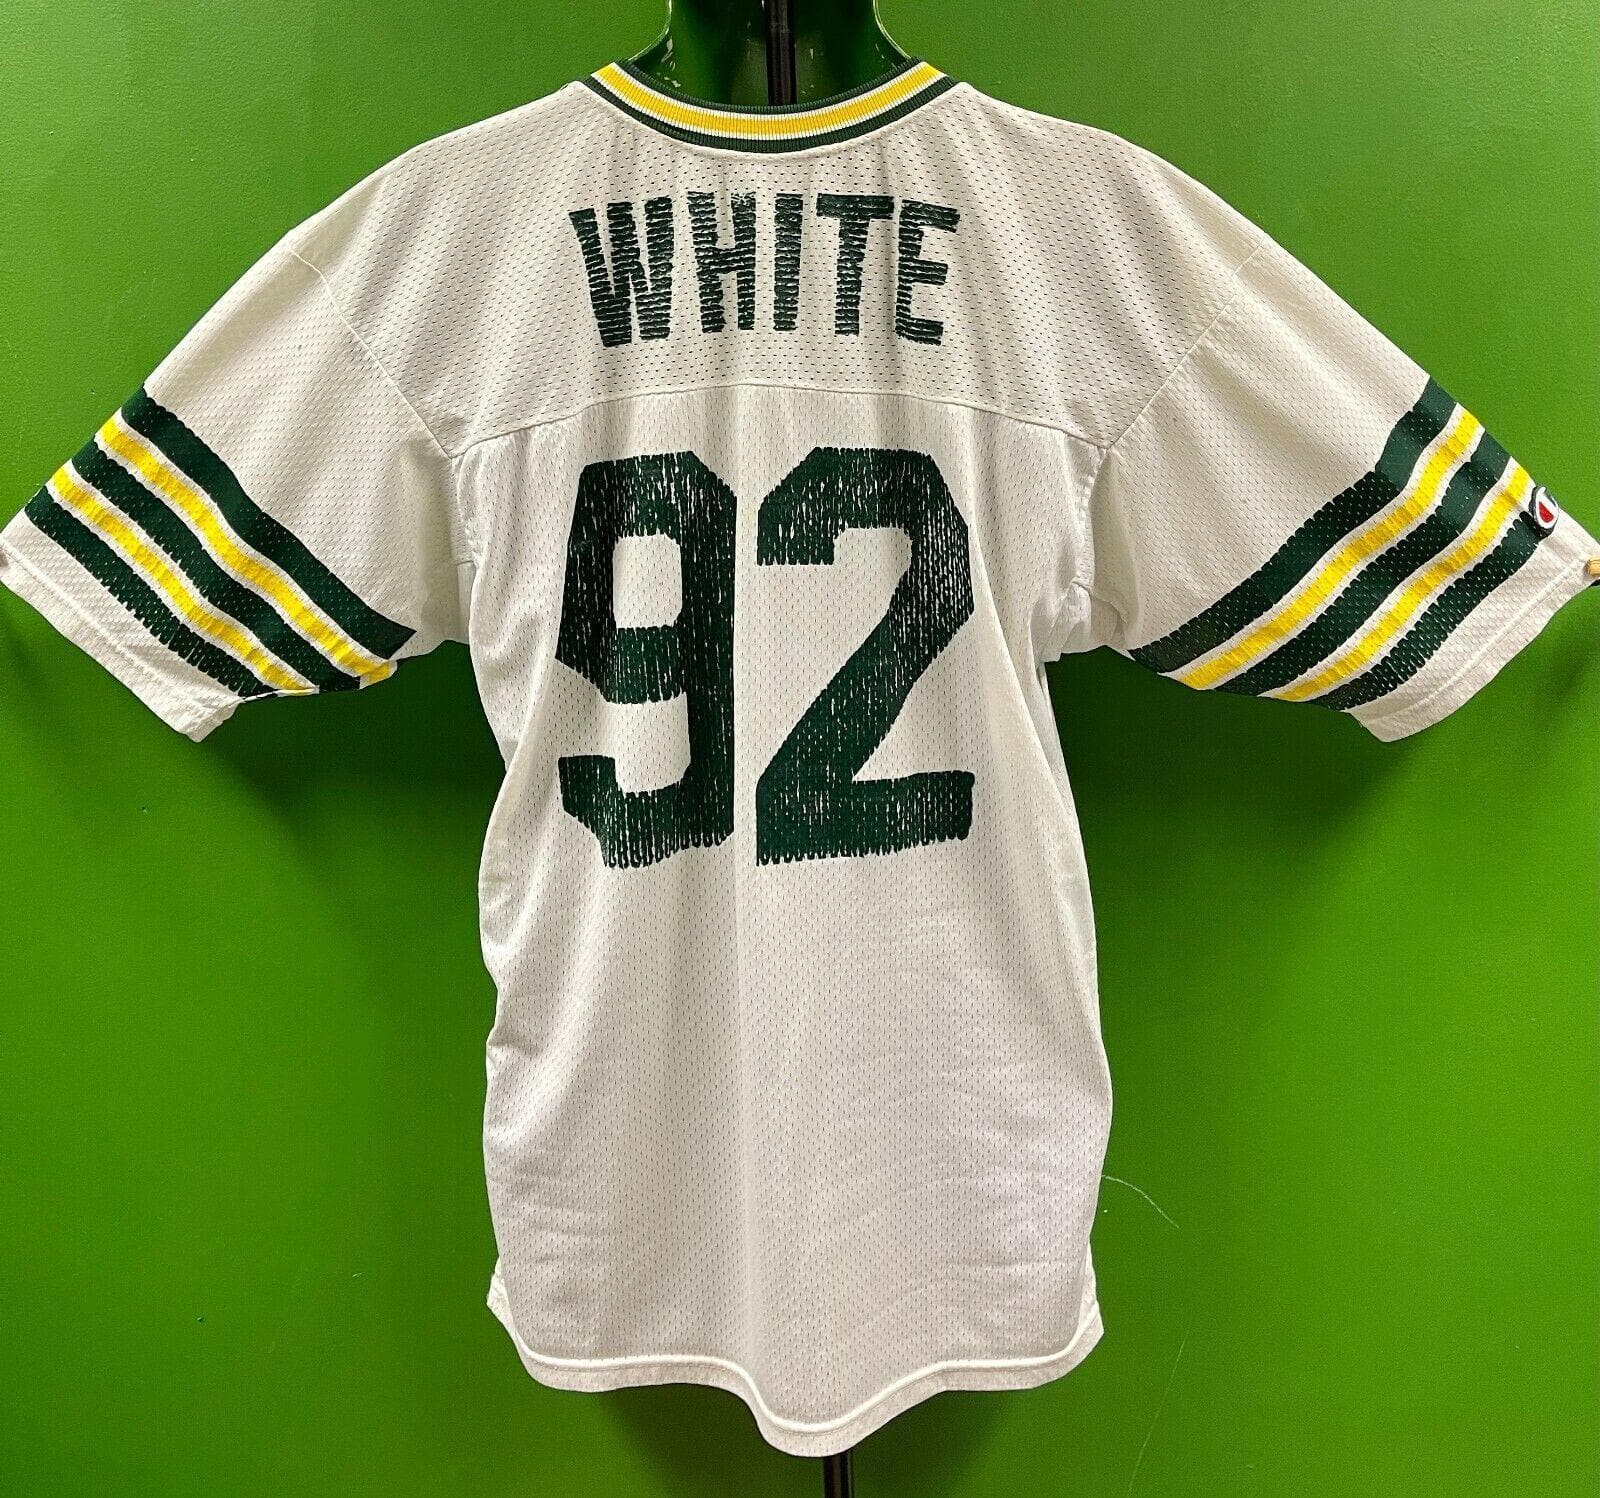 NFL Green Bay Packers White #92 Vintage Champion Jersey Men's 44 large